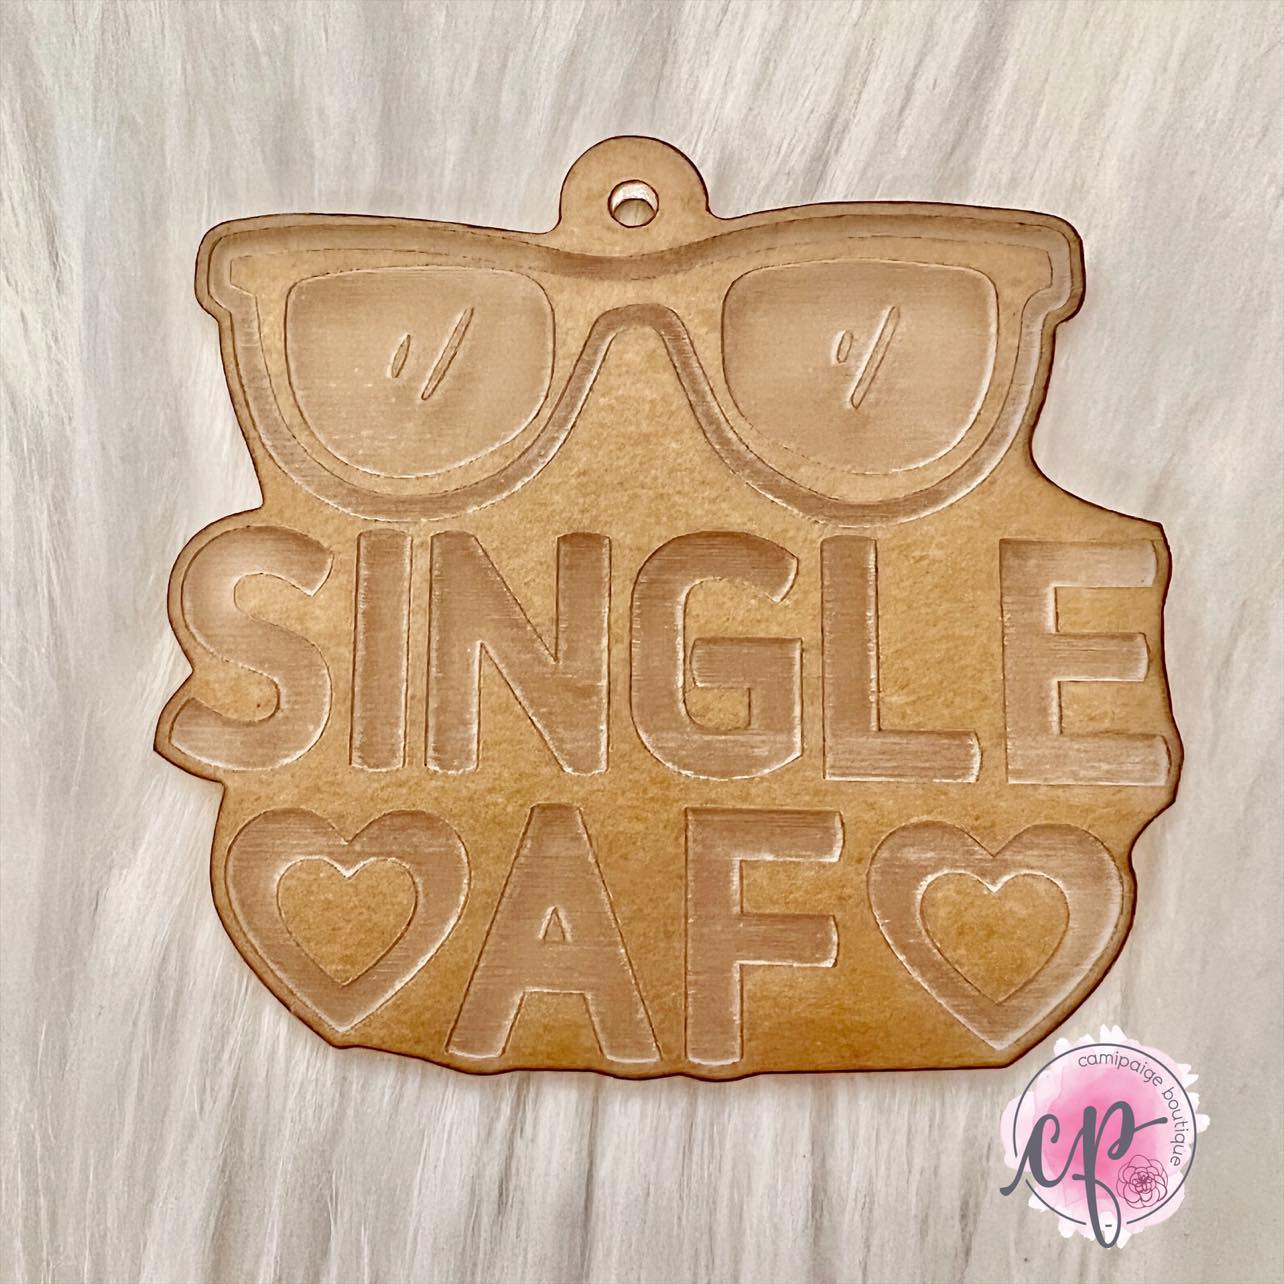 Single AF - Engraved Acrylic Blank - CamiPaige Boutique